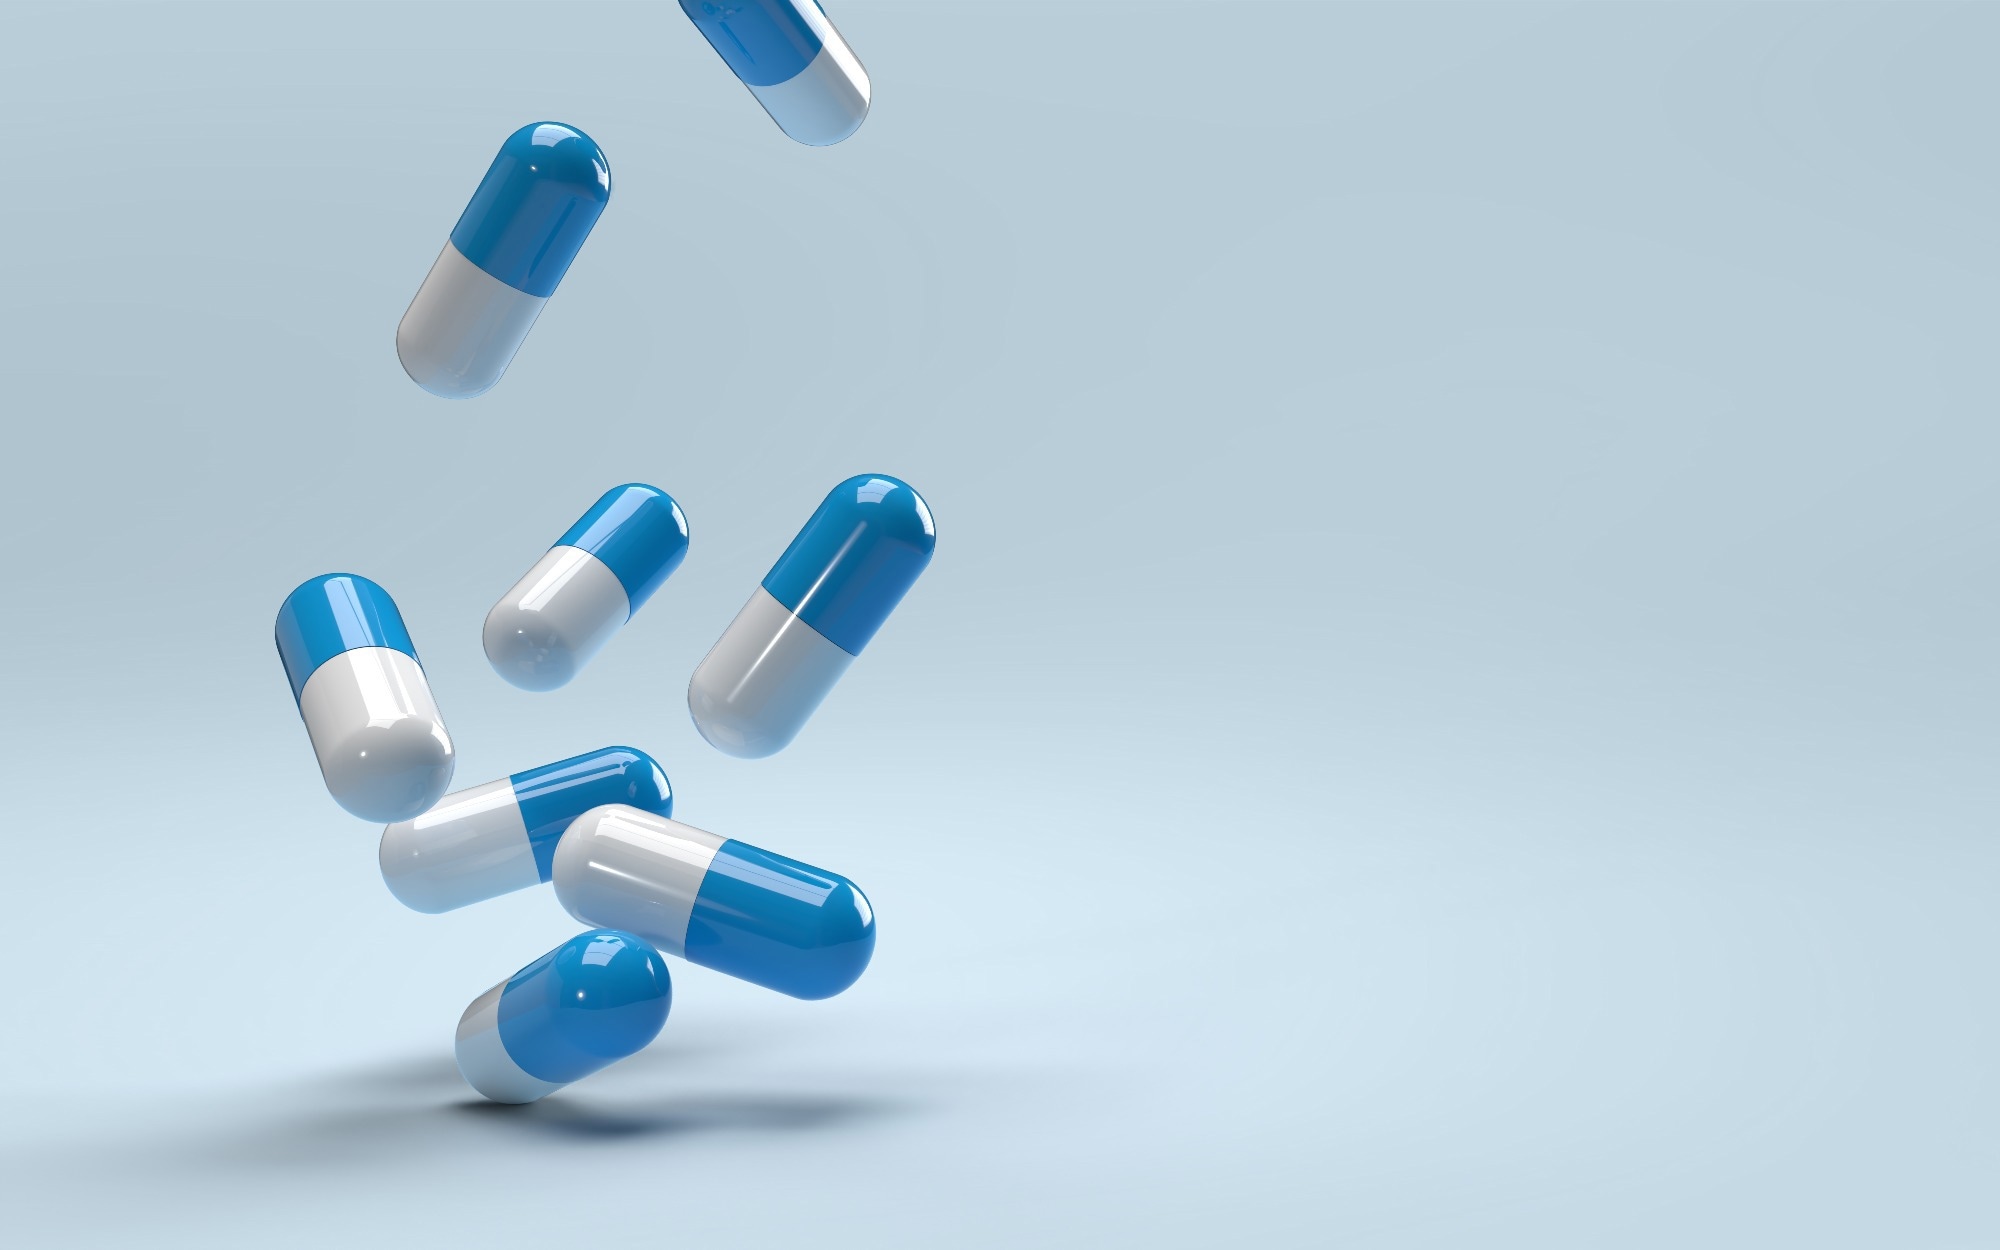 Study: An antibiotic from an uncultured bacterium binds to an immutable target. Image Credit: Jaromond/Shutterstock.com